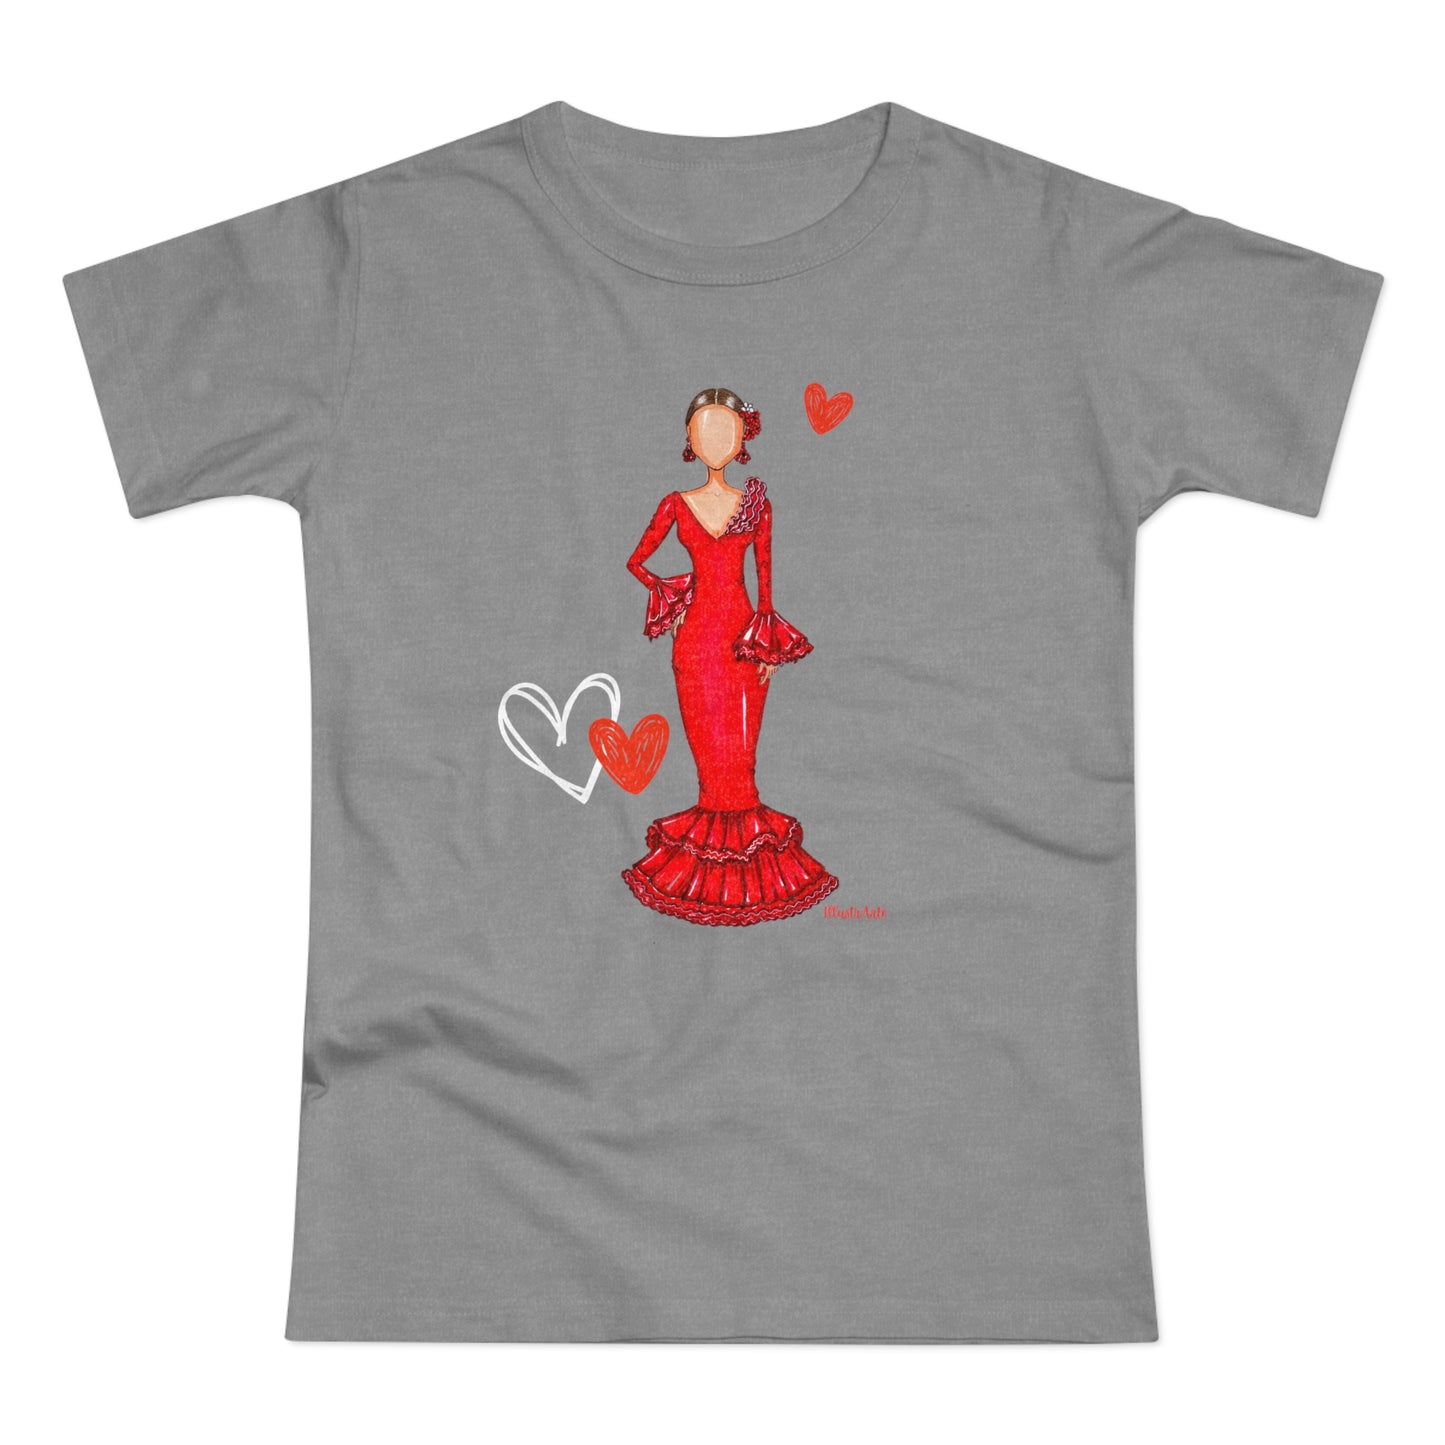 a t - shirt with a woman in a red dress